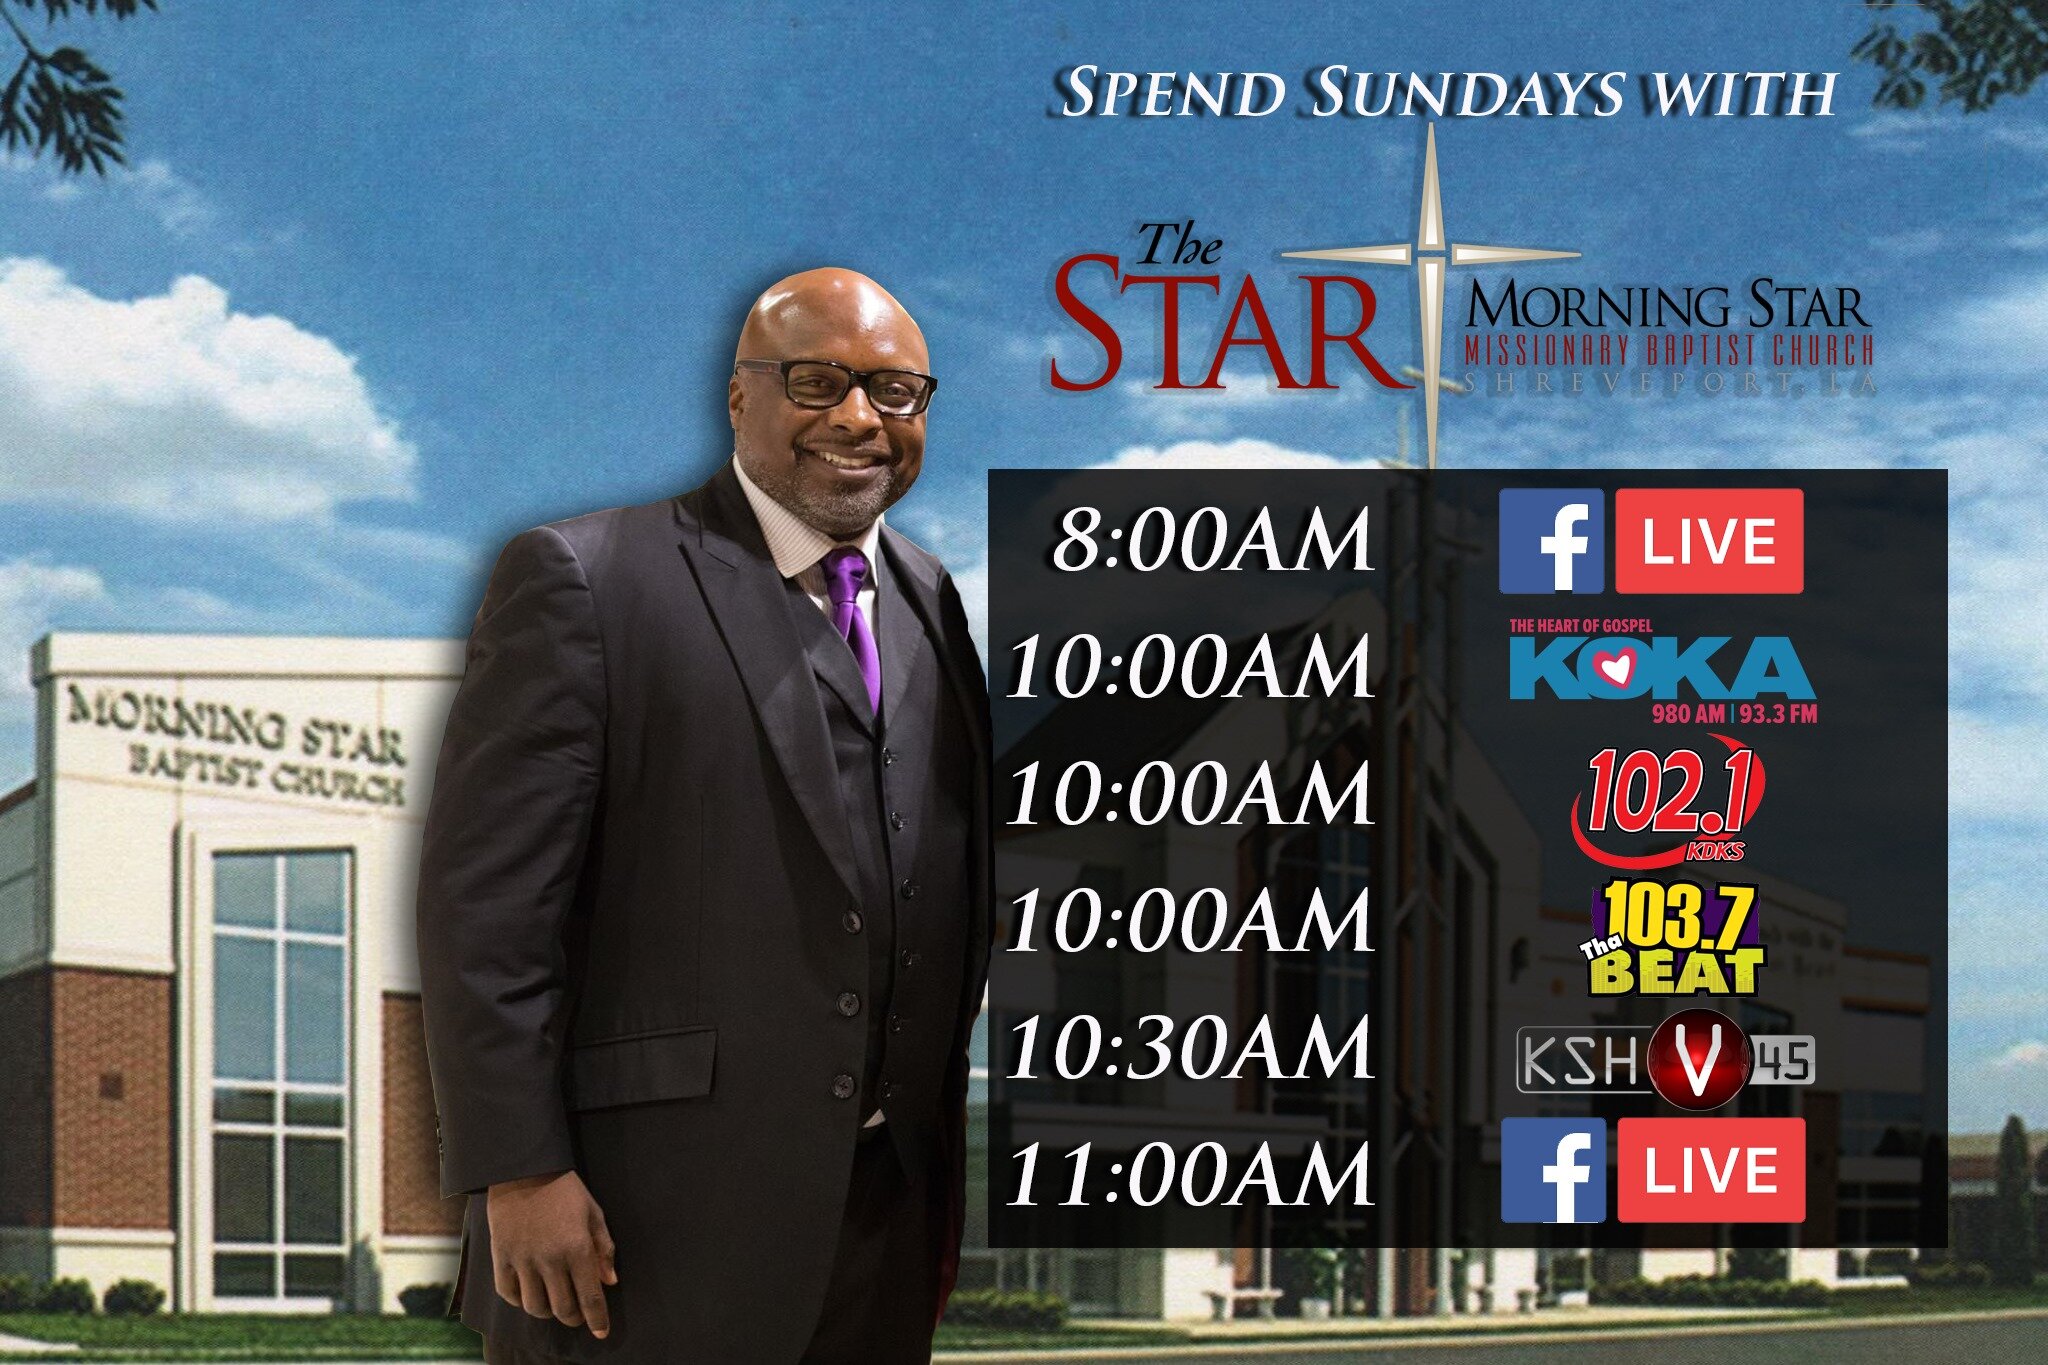 Find some time to spend with Morning Star. We would love to have you visit with us!